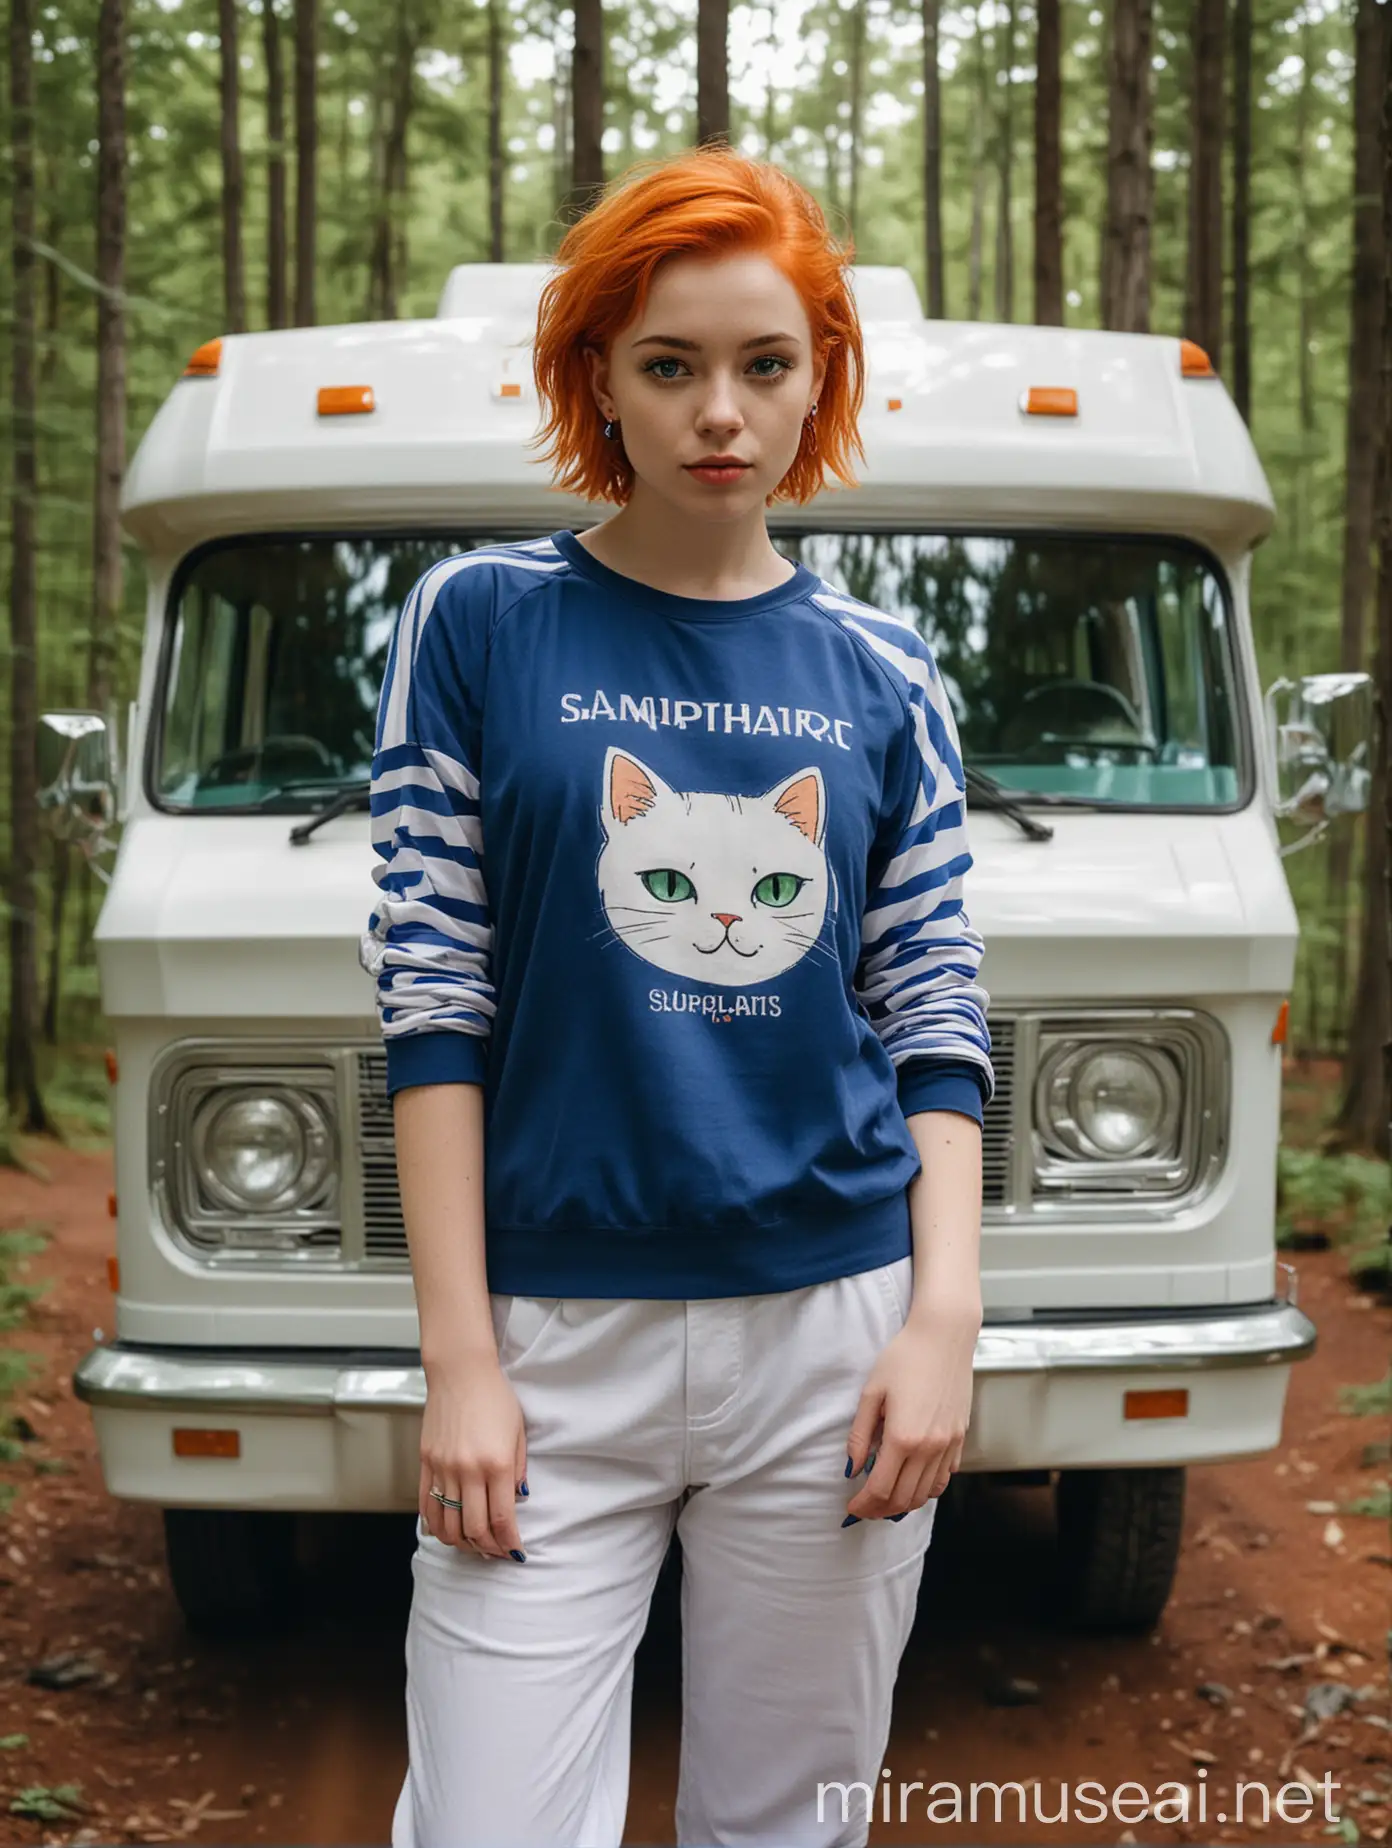 young woman, pale skin, green eyes and short orange hair held by a blue hairclip and wore sapphire earrings, an elbow-length blue raglan shirt with a cat logo, white capri pants, and white sneakers with dark blue stripes without socks, standing in front of a GMC motorhome in the forest, beautiful, alluring